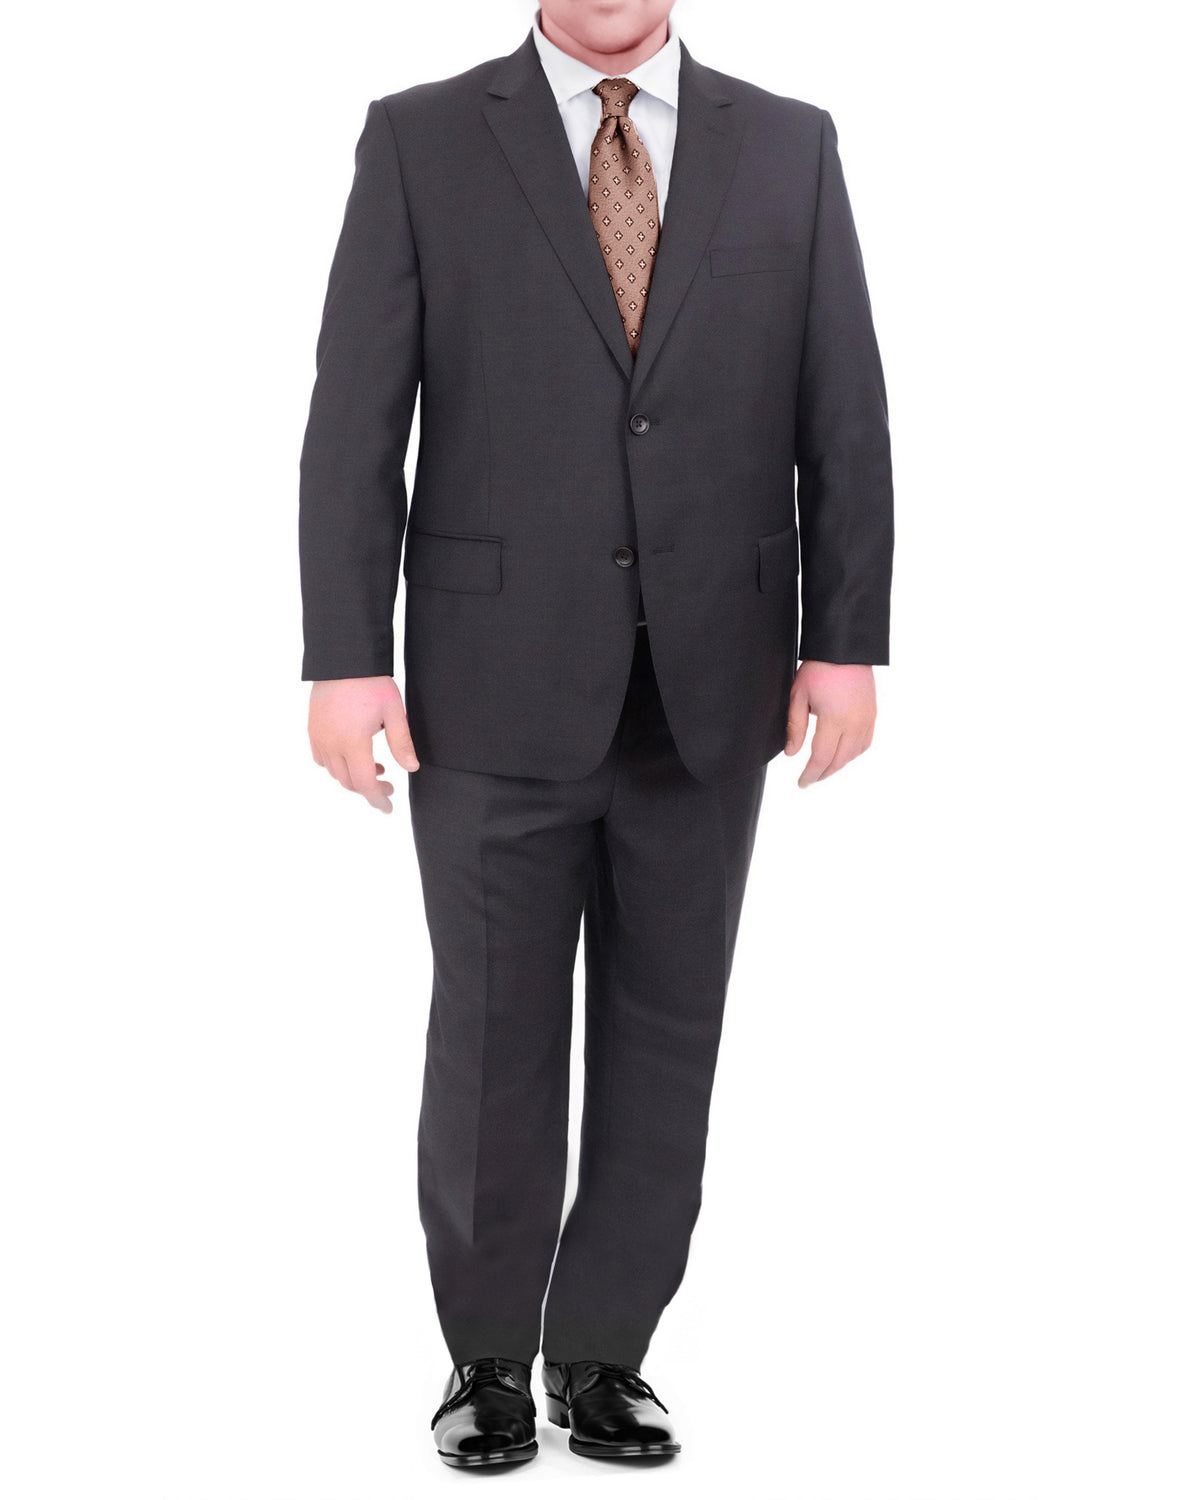 Mens Mazara Portly Fit Solid Charcoal Gray Two Button Wool Suit